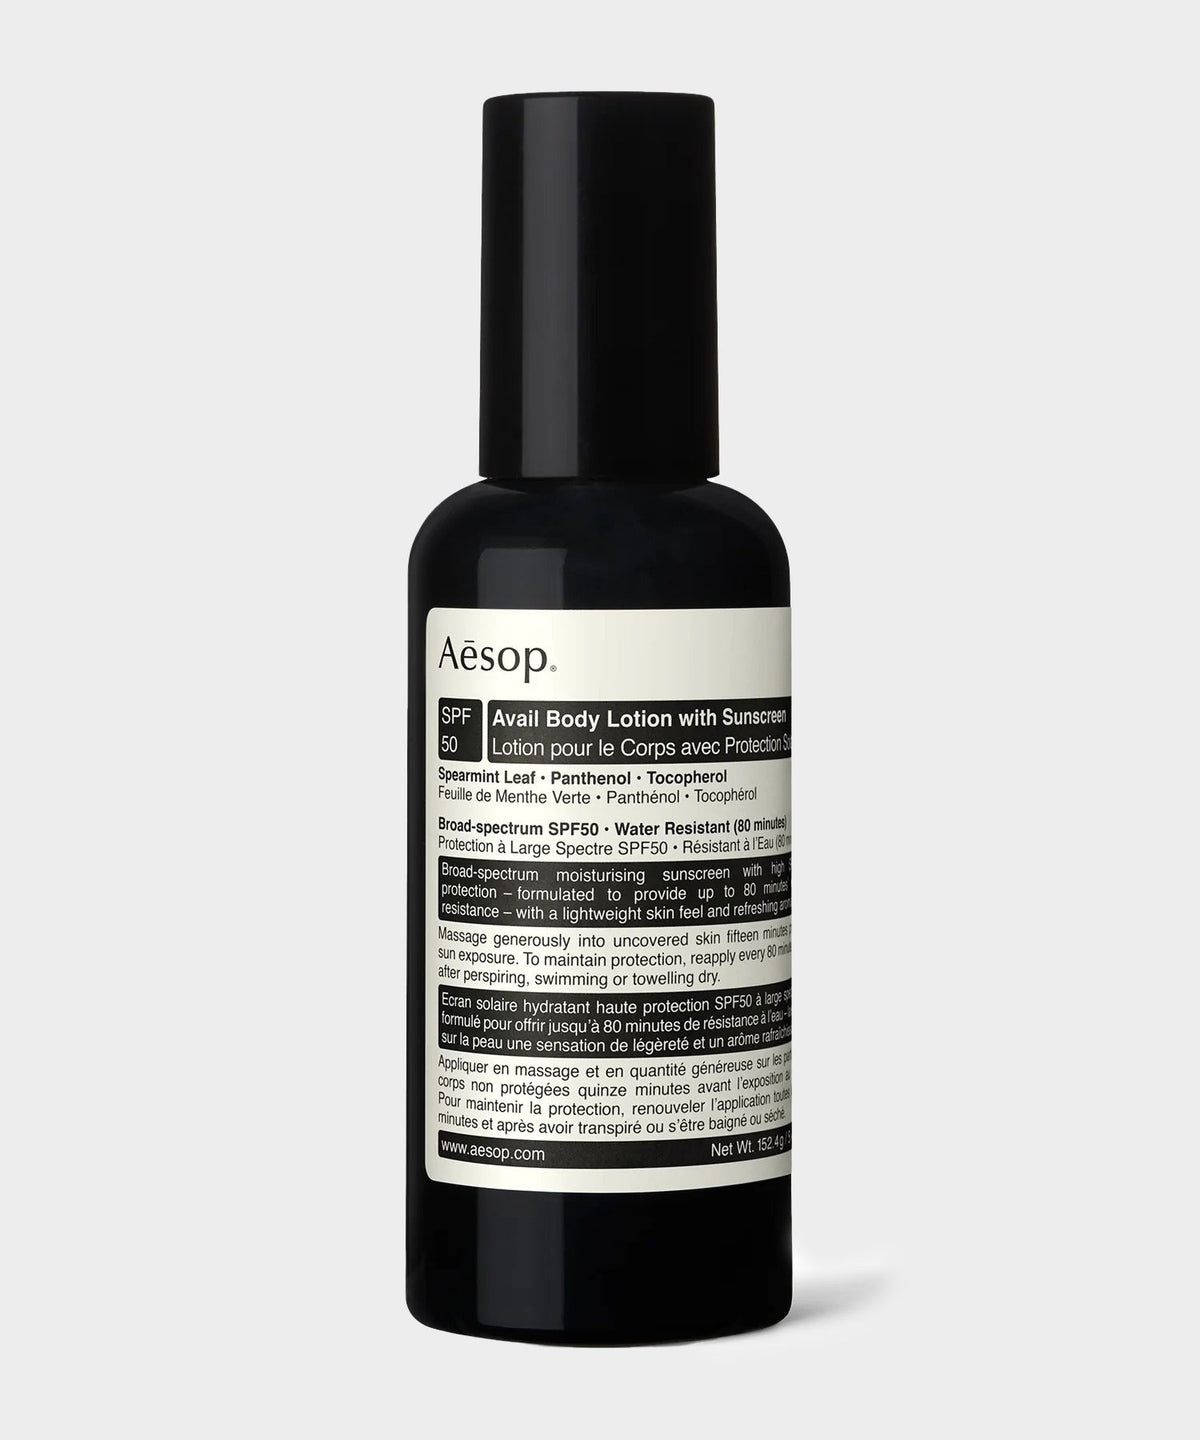 Aesop Avail Body Lotion SPF50 150mL